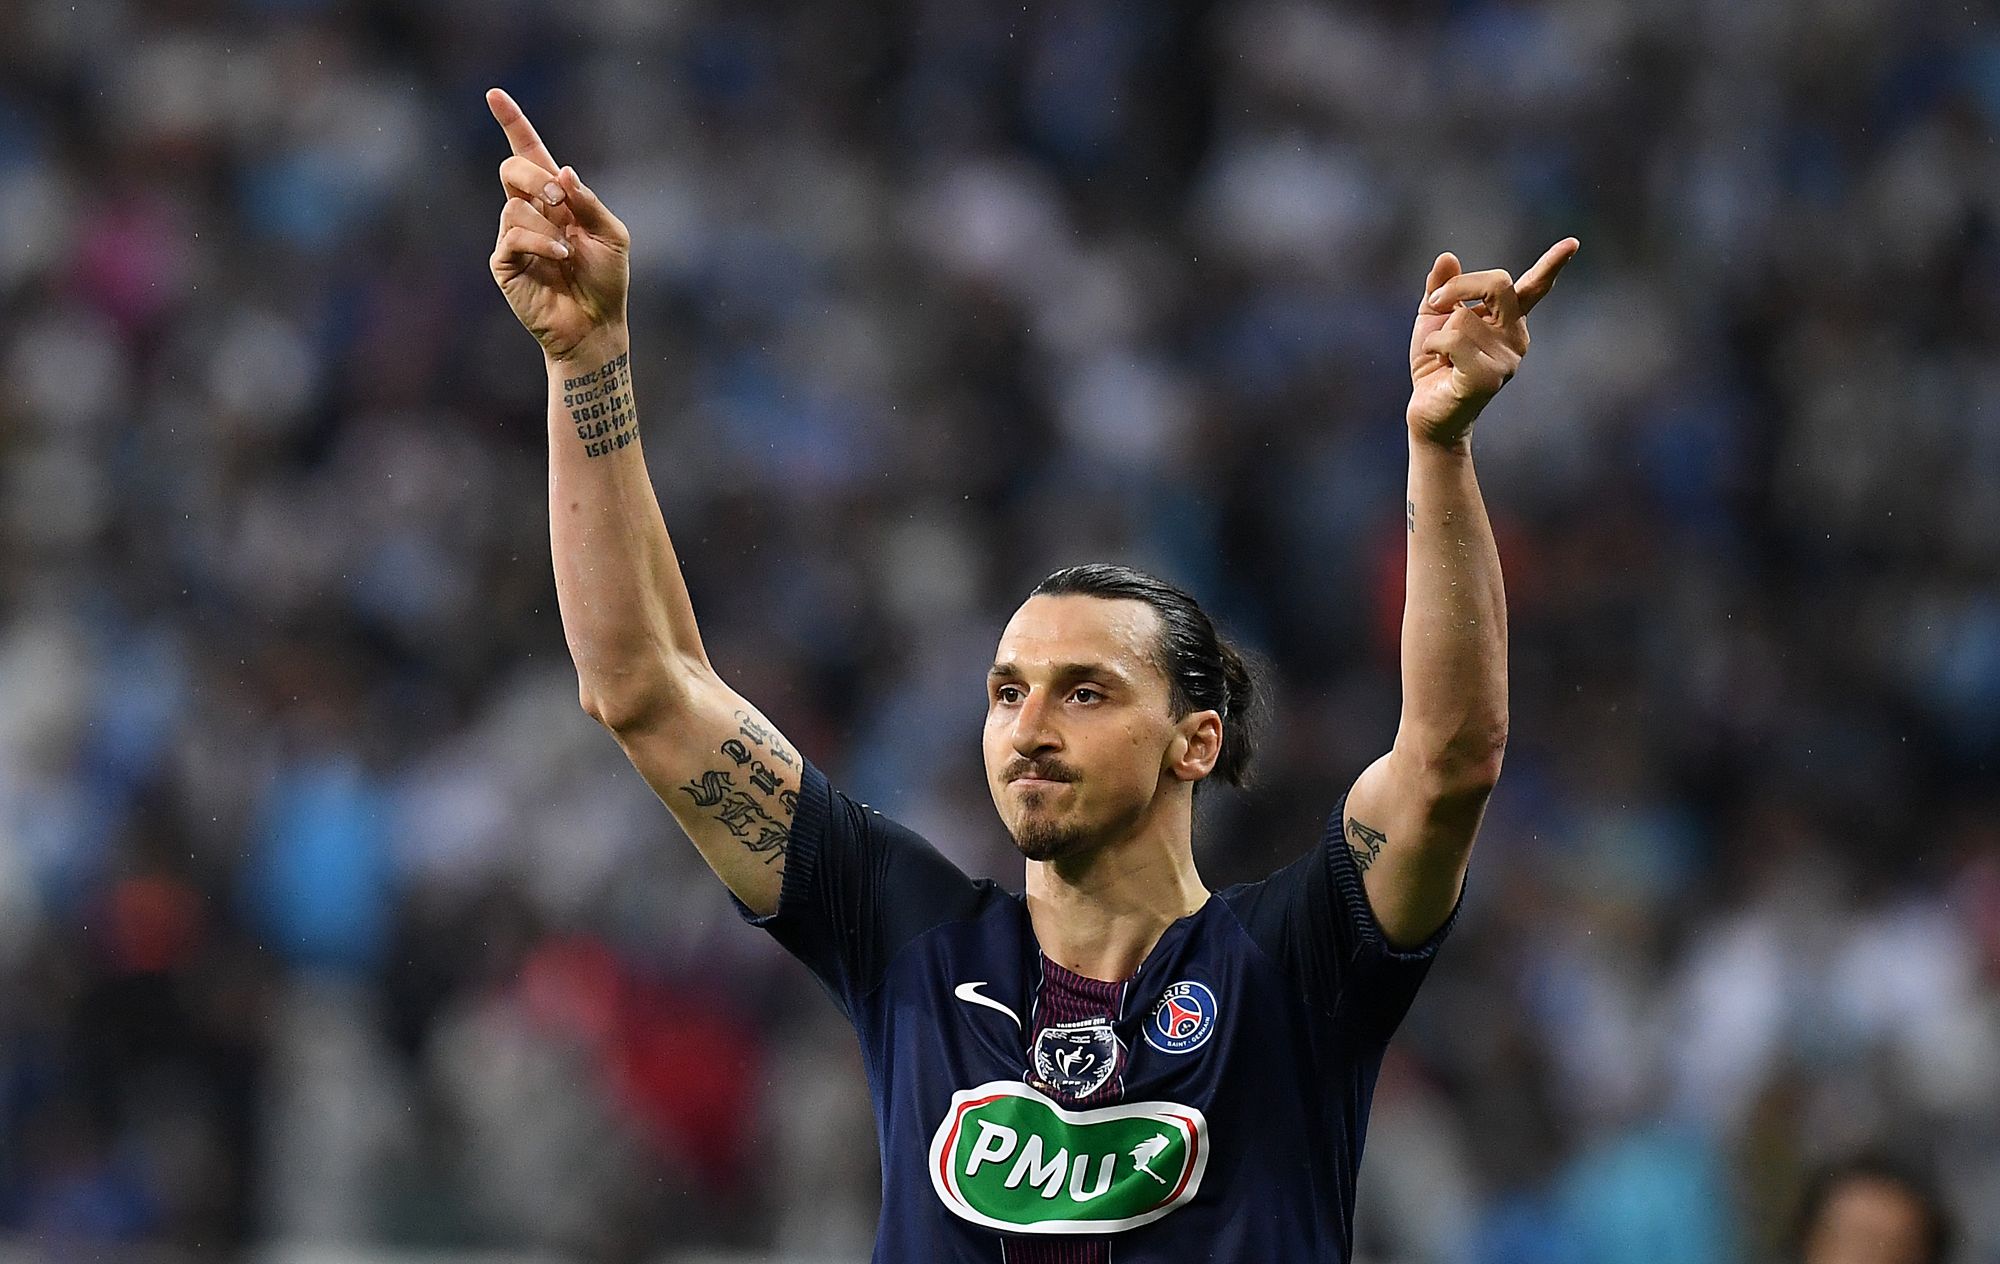 Drama in store as Zlatan writes final chapter